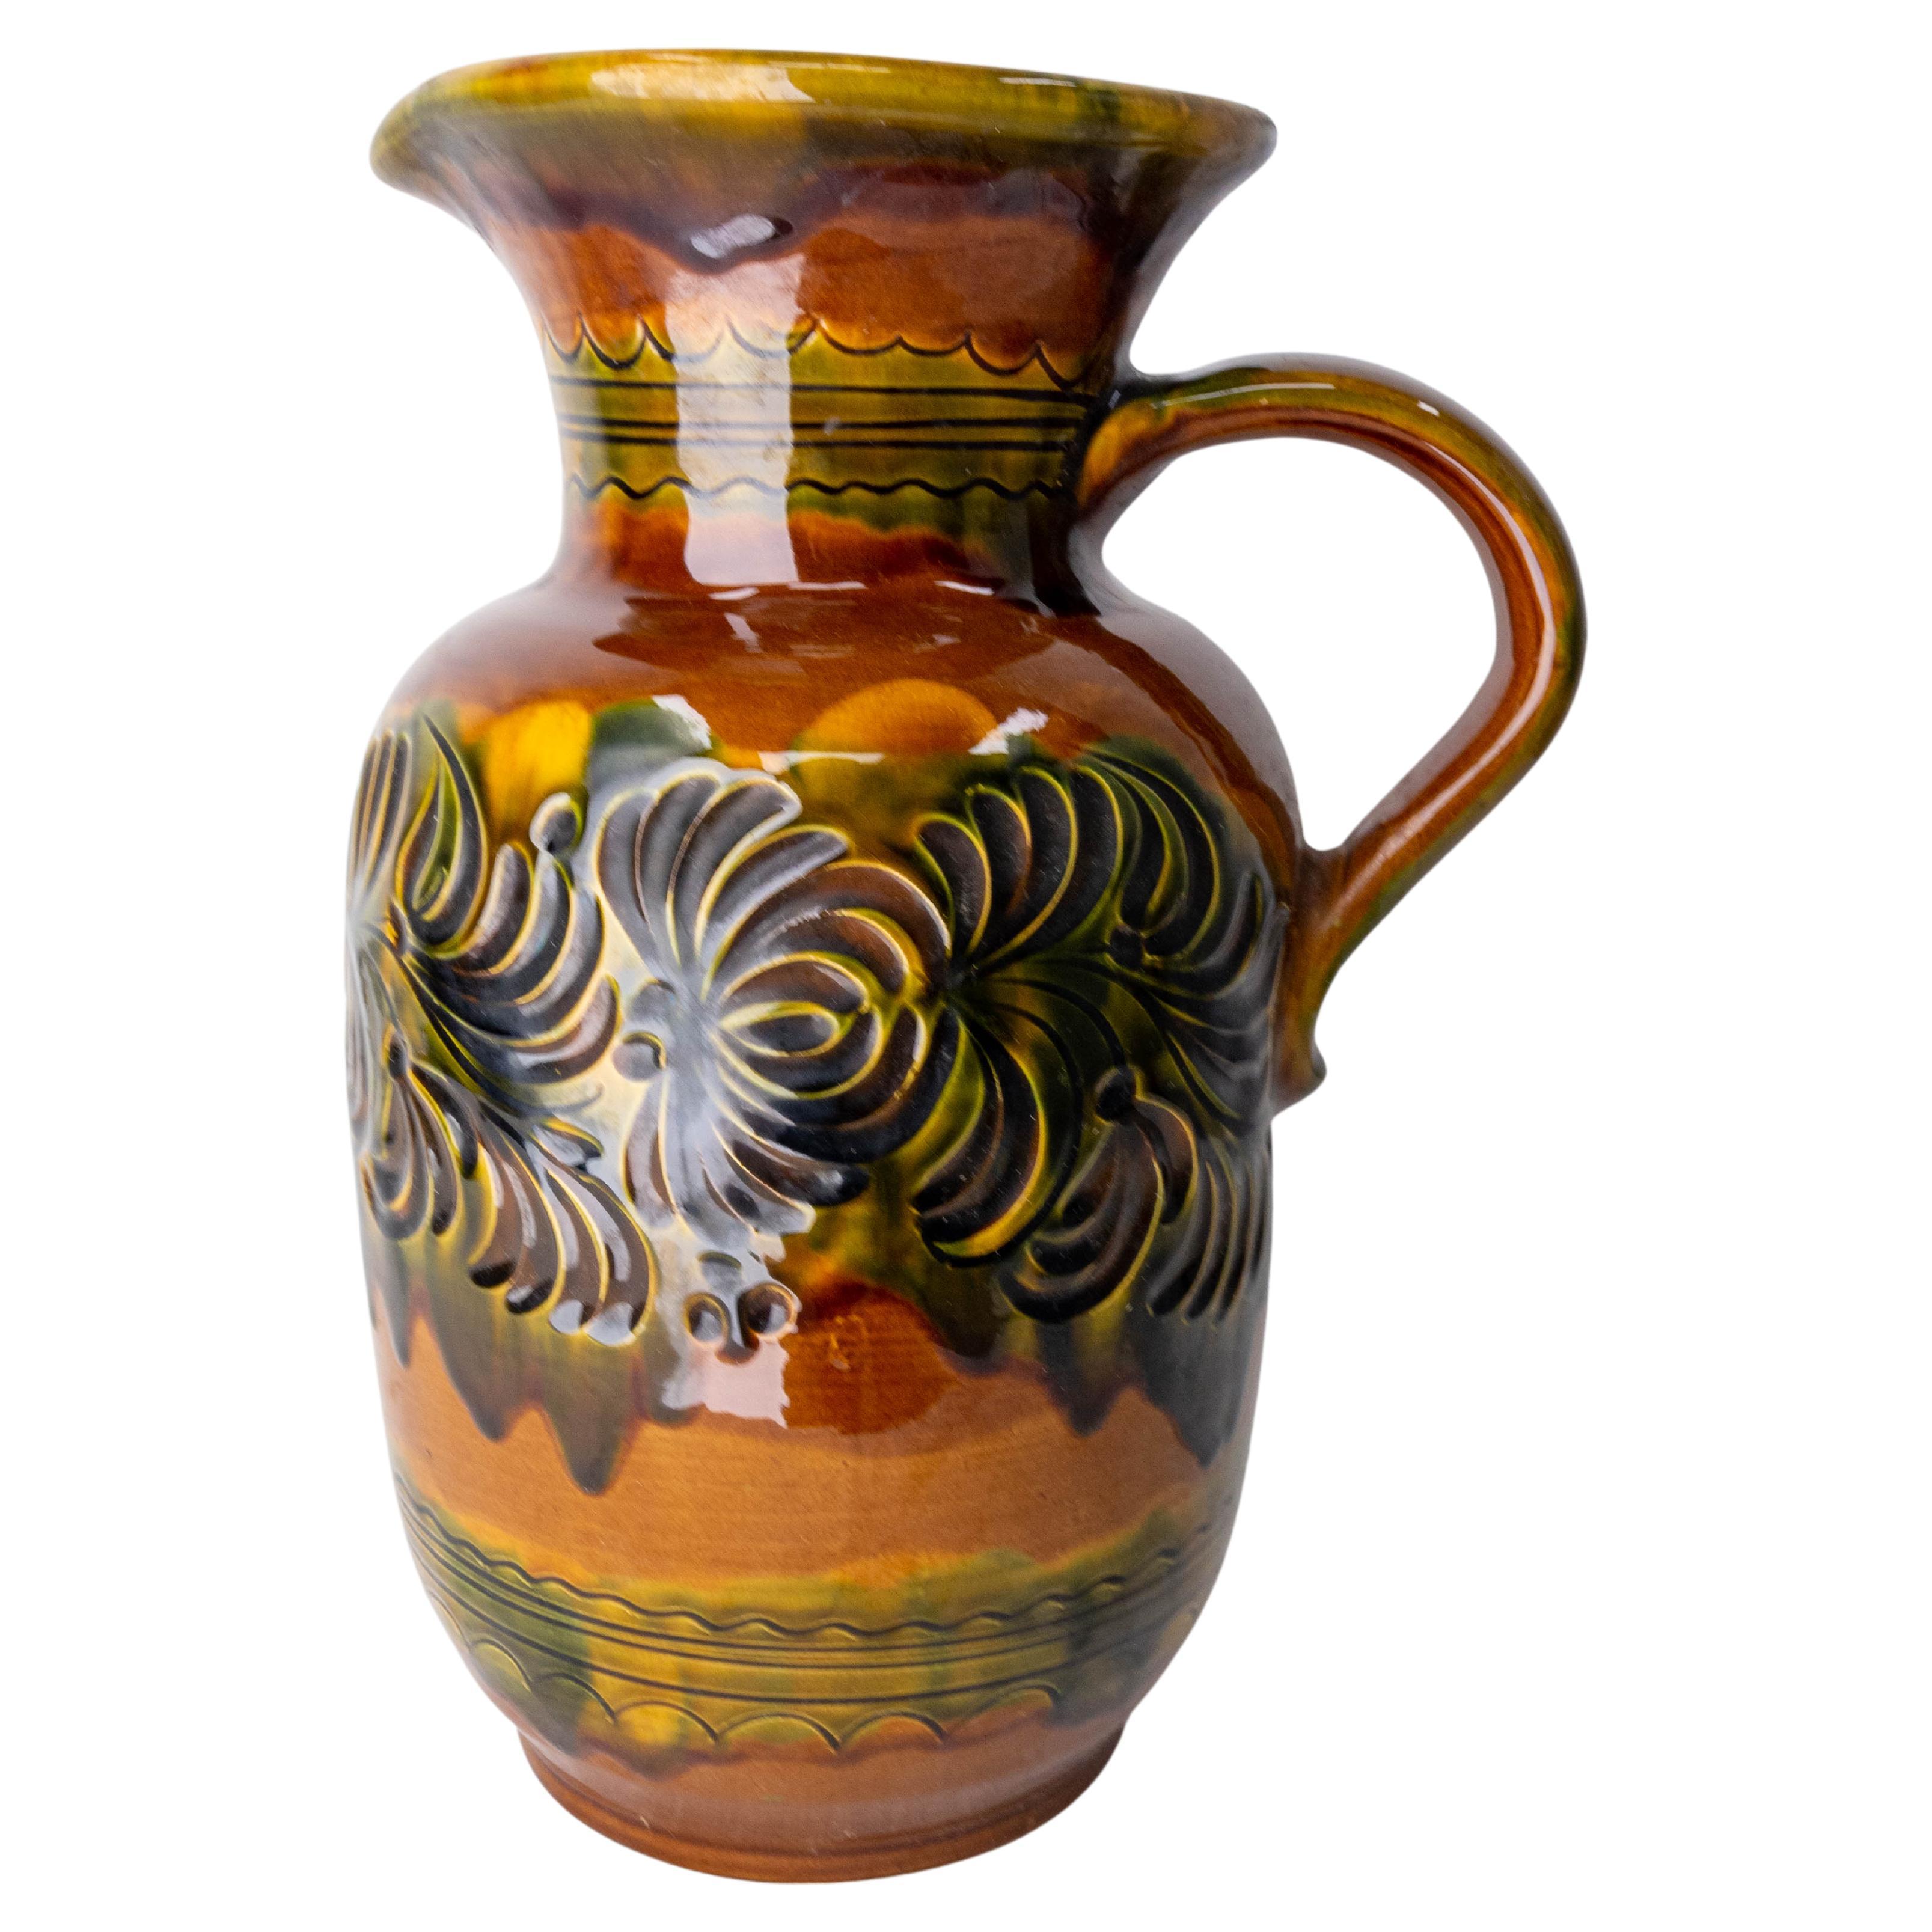 Ceramic Pitcher with Decoration of Relief Leaves, Mid-Century Germany